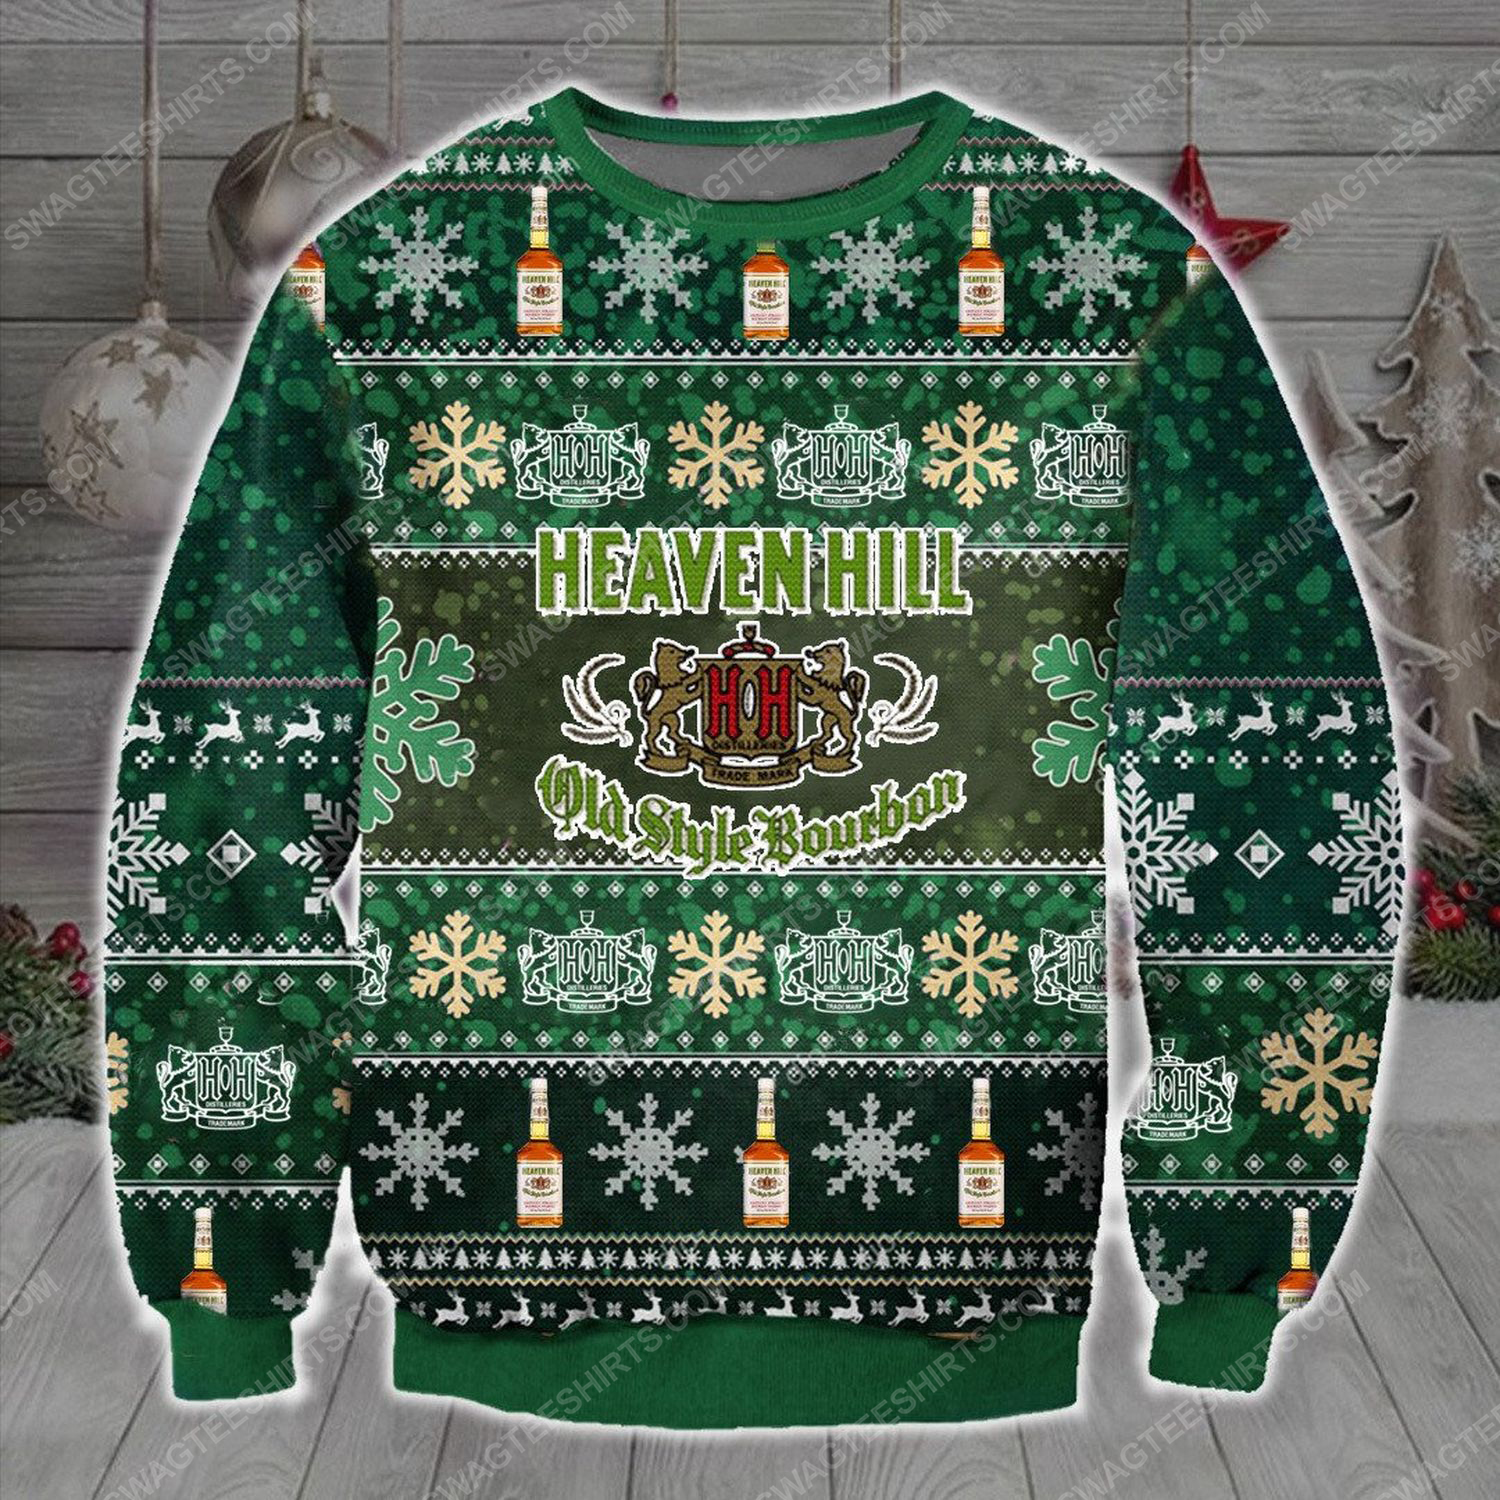 Heaven hill old style bourbon ugly christmas sweater